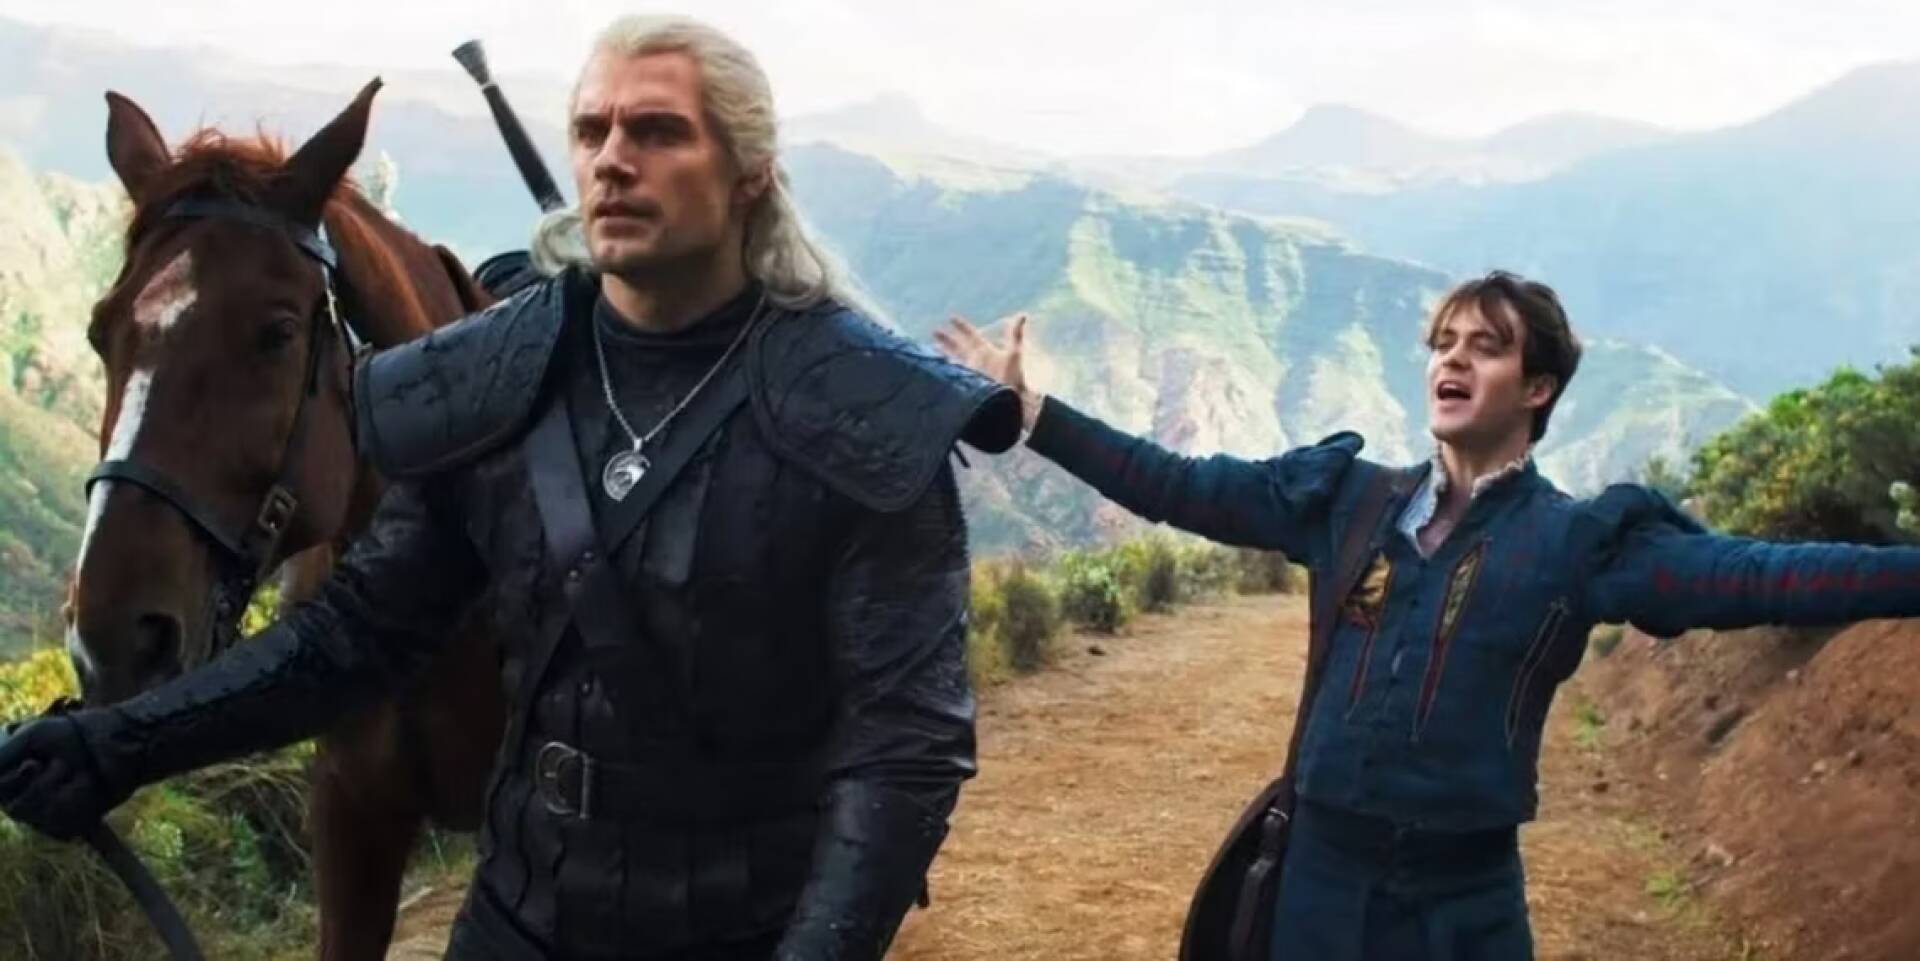 The Witcher and the “insistent” casting of Henry Cavill: “it was really annoying”